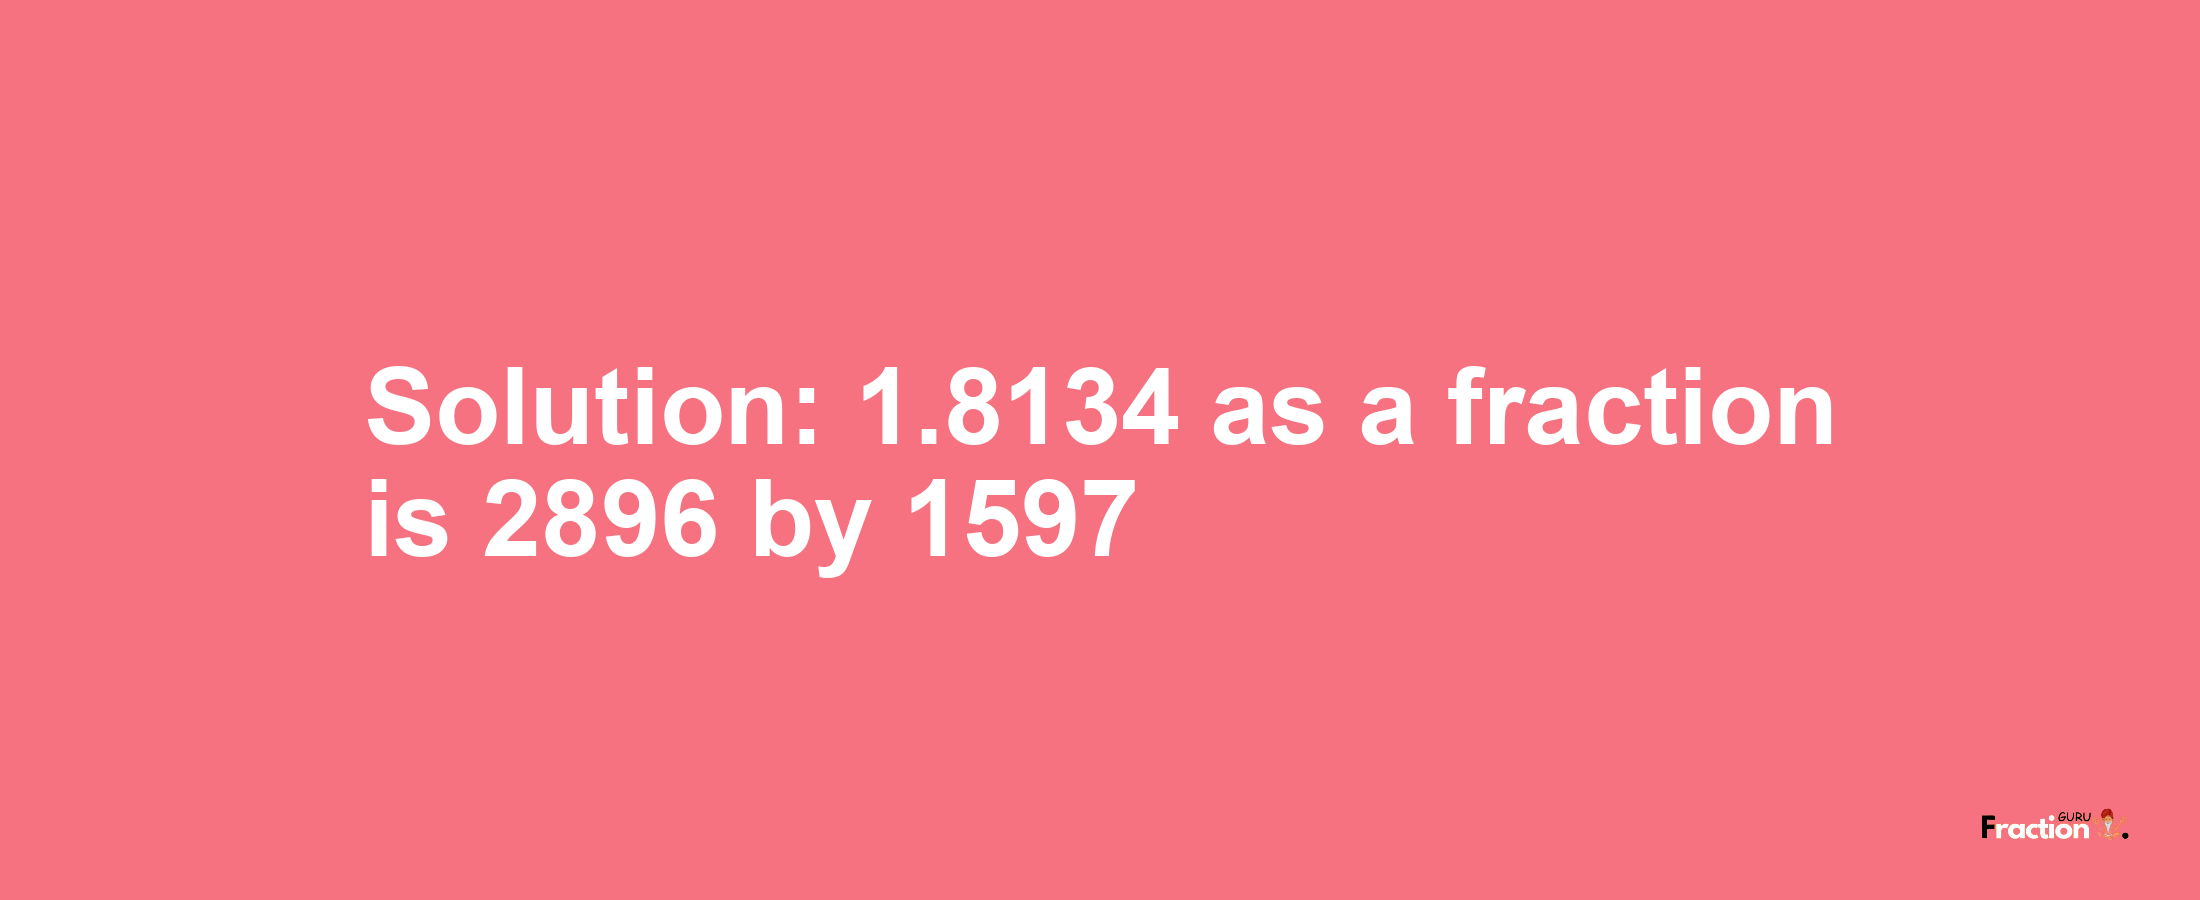 Solution:1.8134 as a fraction is 2896/1597